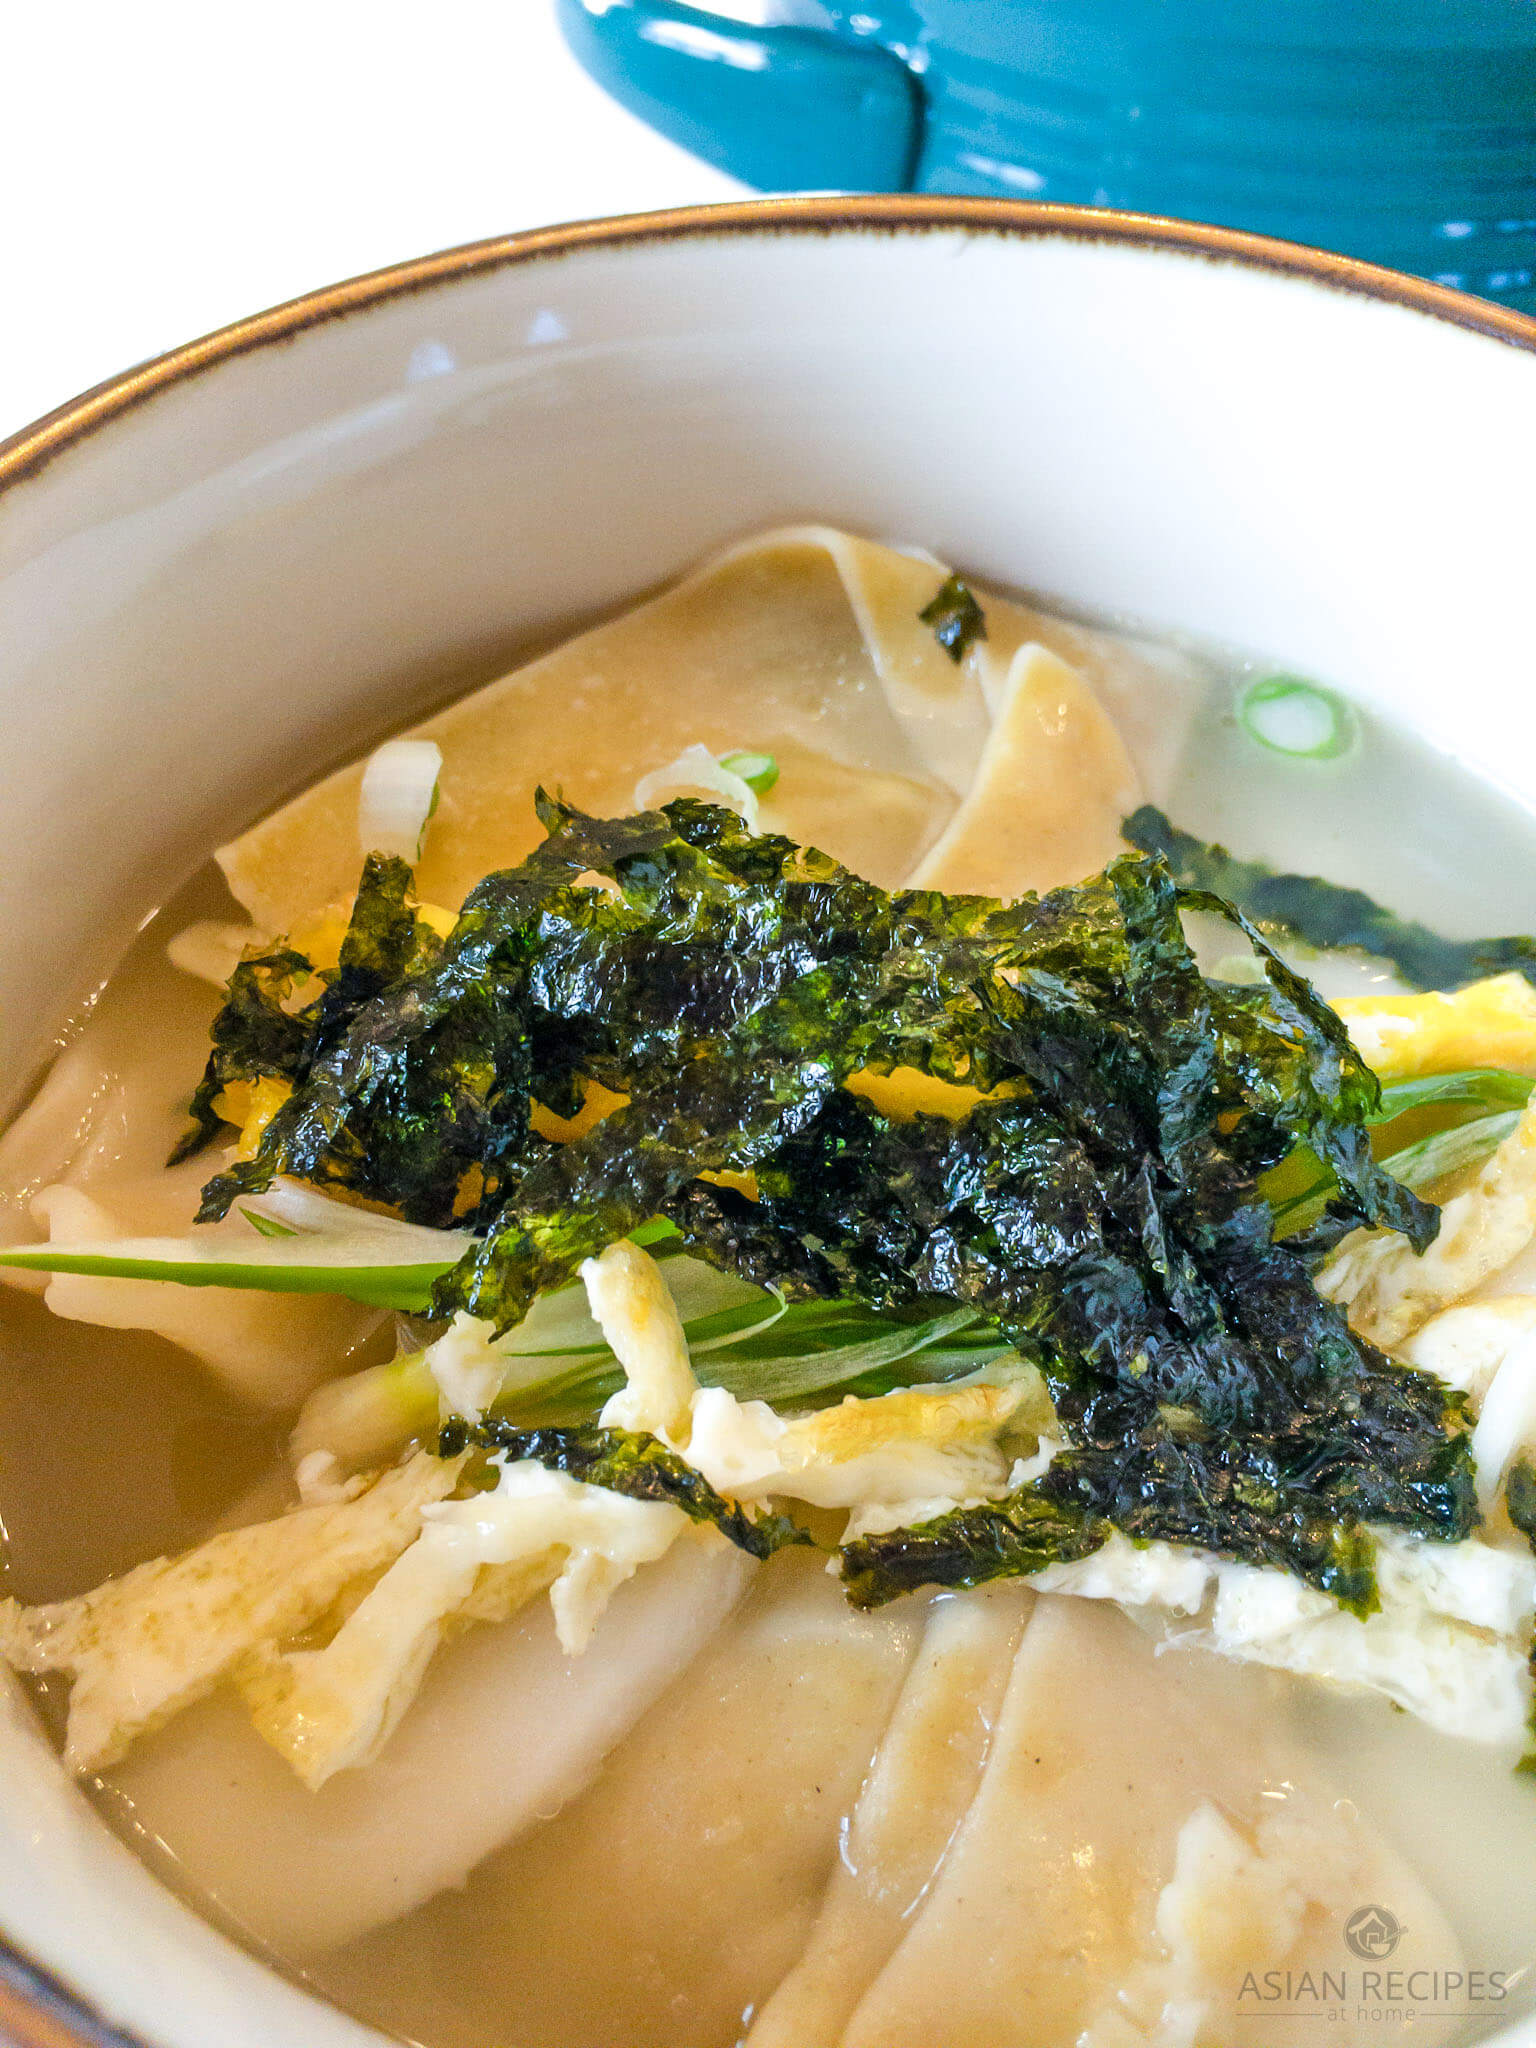 Korean rice cake soup is a savory and delicious soup made of sliced rice cakes and dumplings in a clear broth.